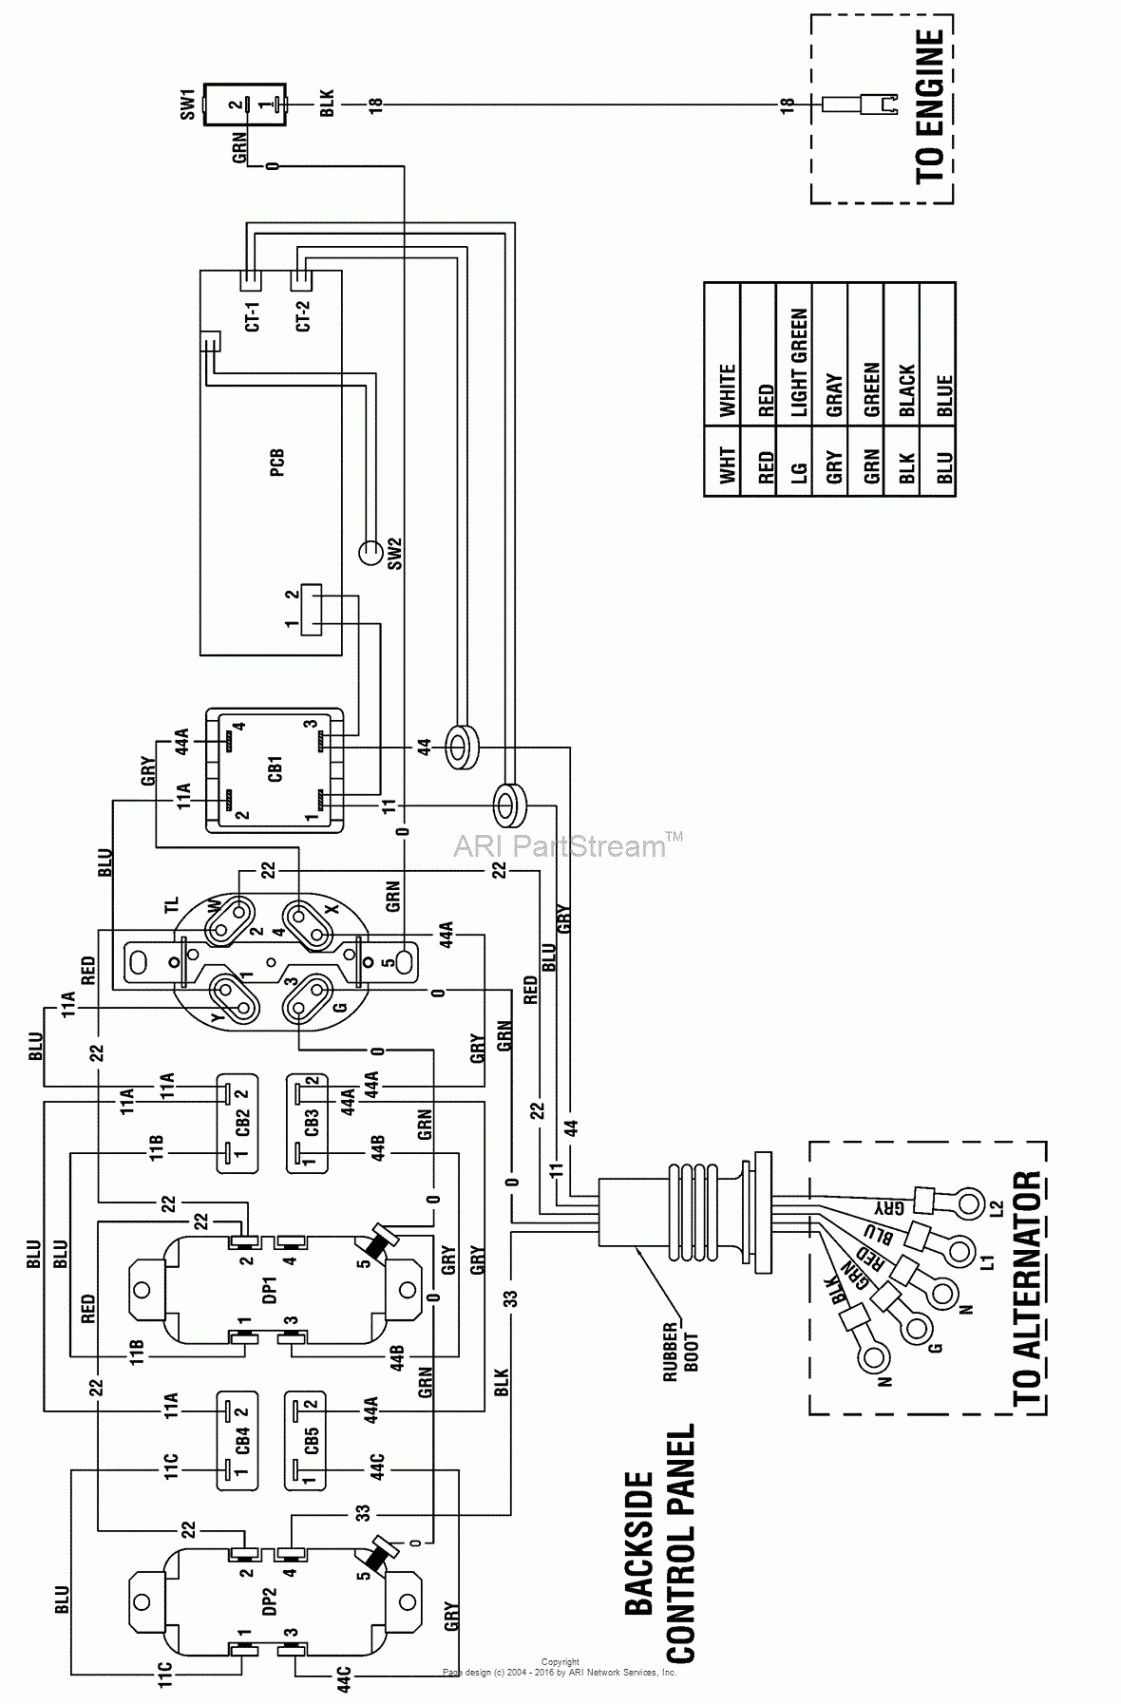 11 Hp Briggs Wiring Diagram - Wiring Diagrams Hubs - Briggs And Stratton 18 Hp Twin Wiring Diagram